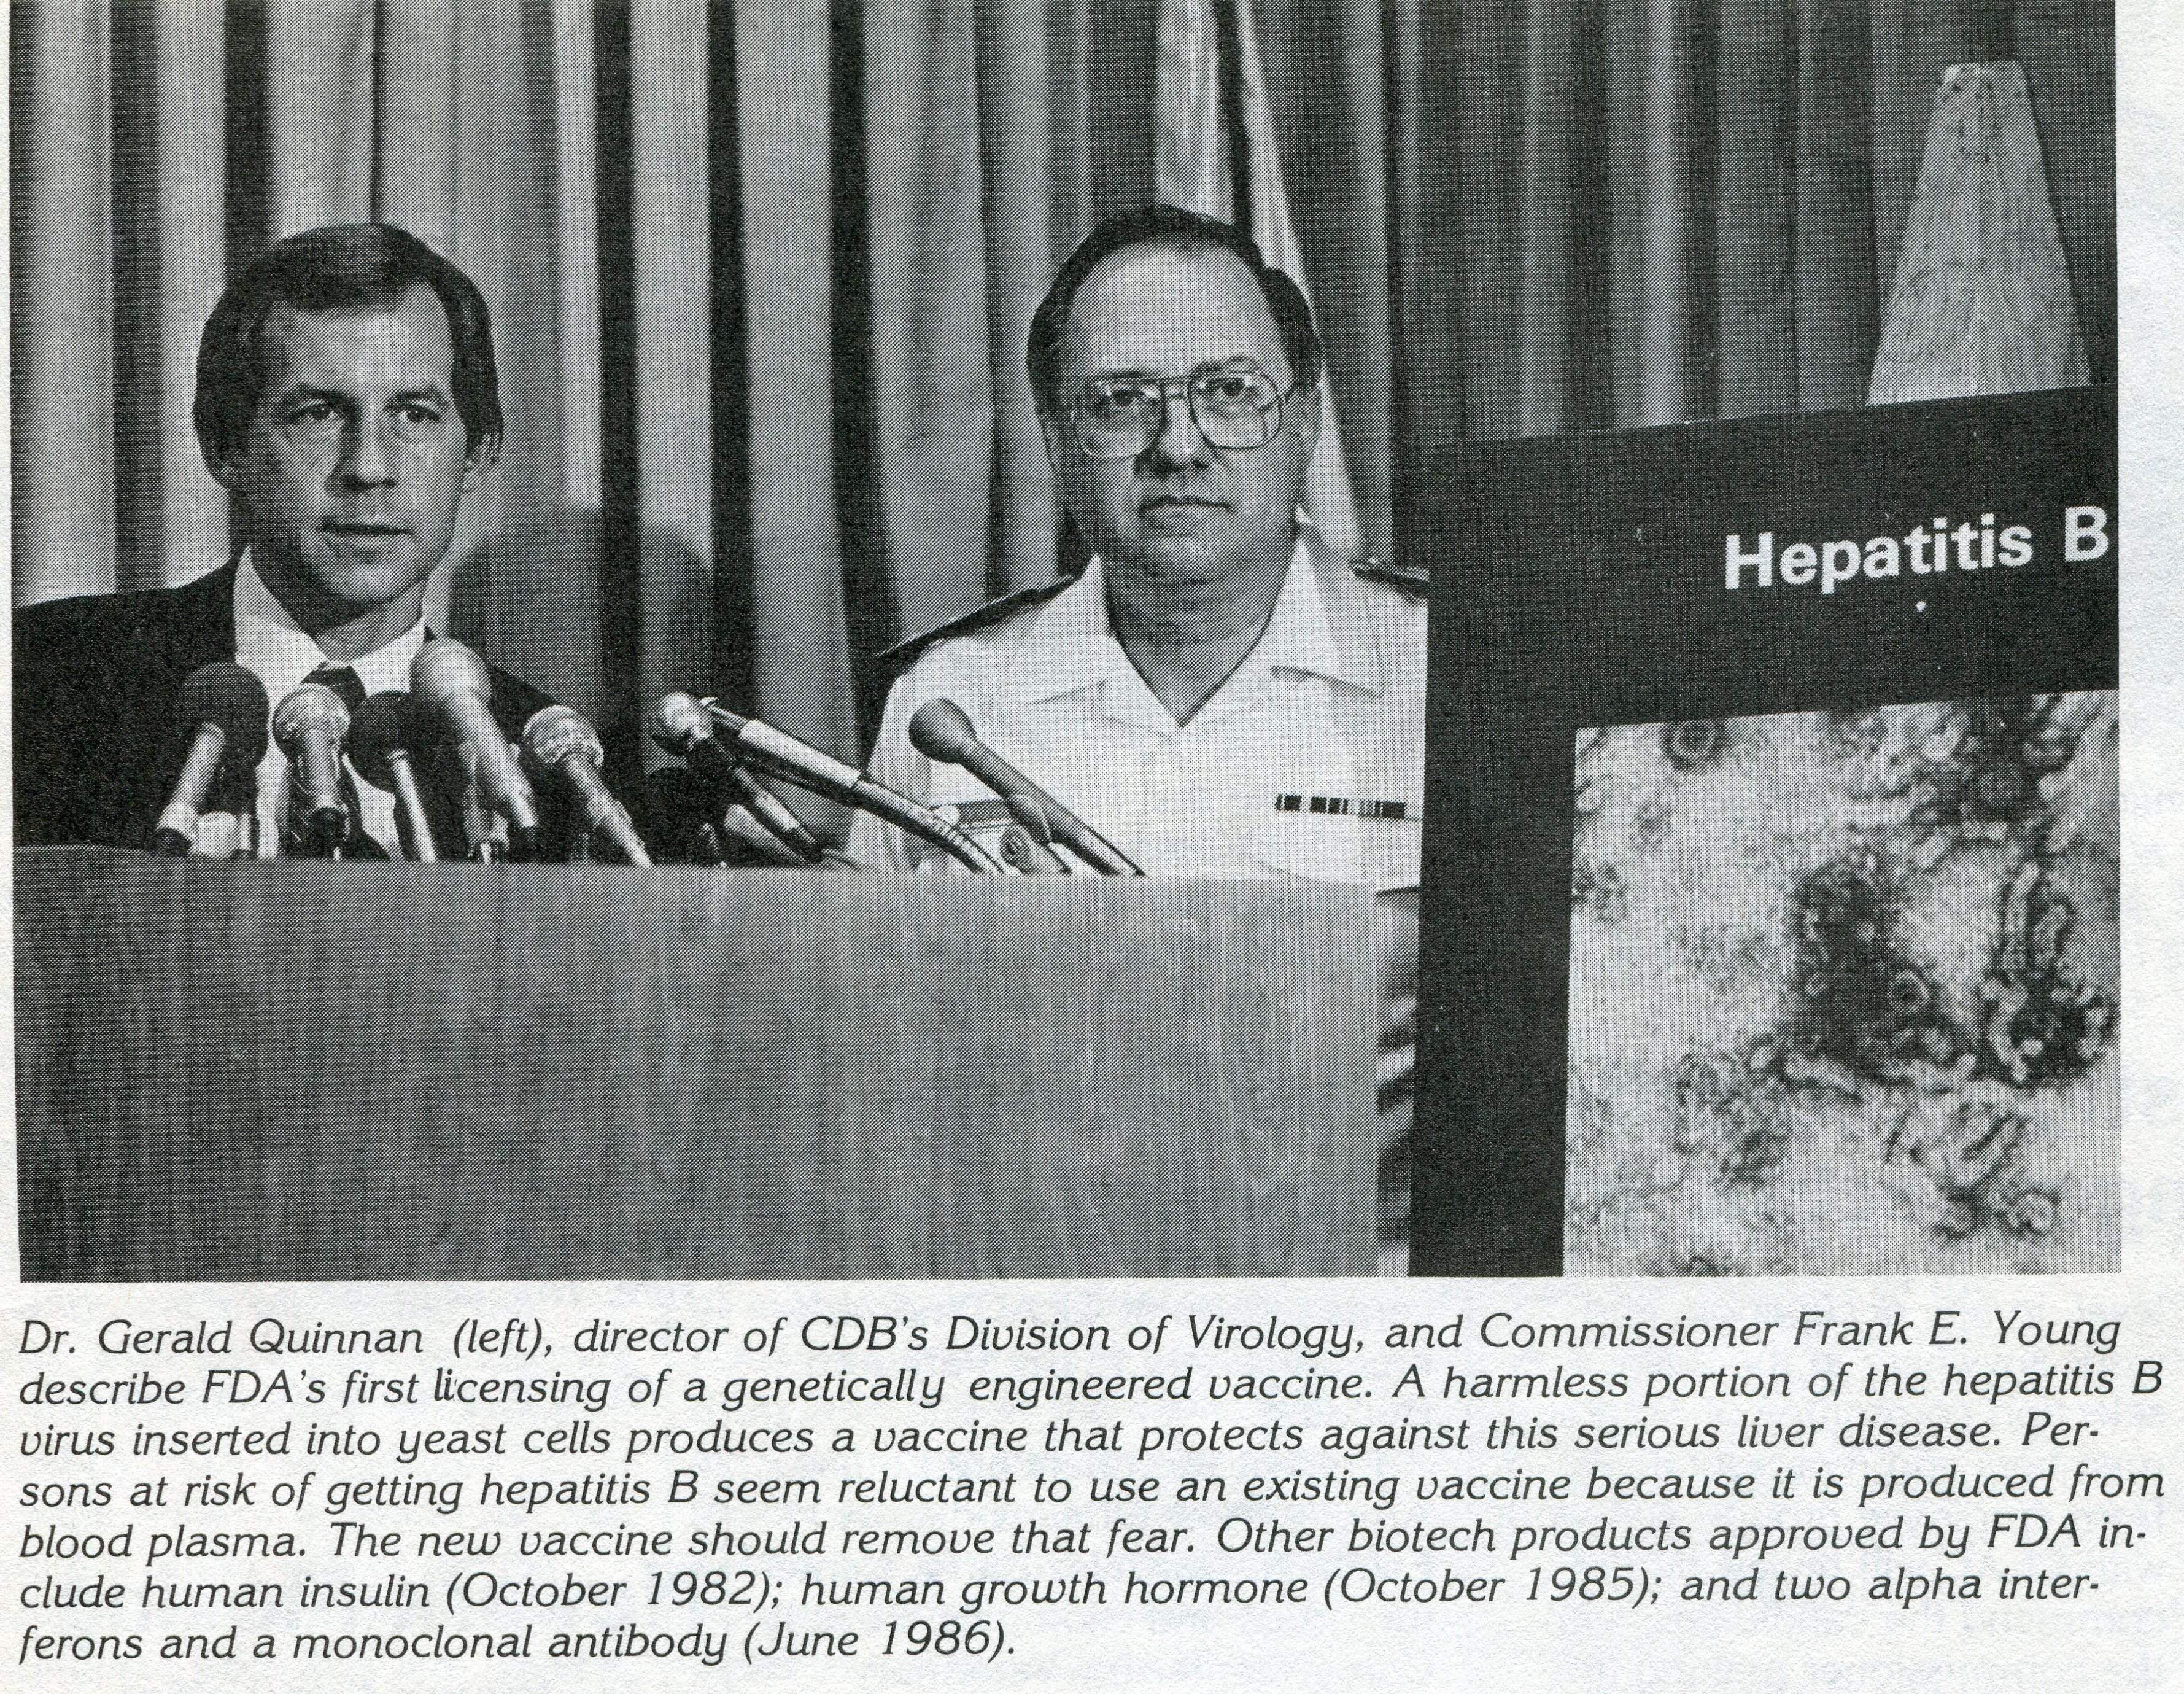 a photo from a newspaper of two men at a press conference, one in uniform and one in coat and tie, with a hepatitis B vaccine poster